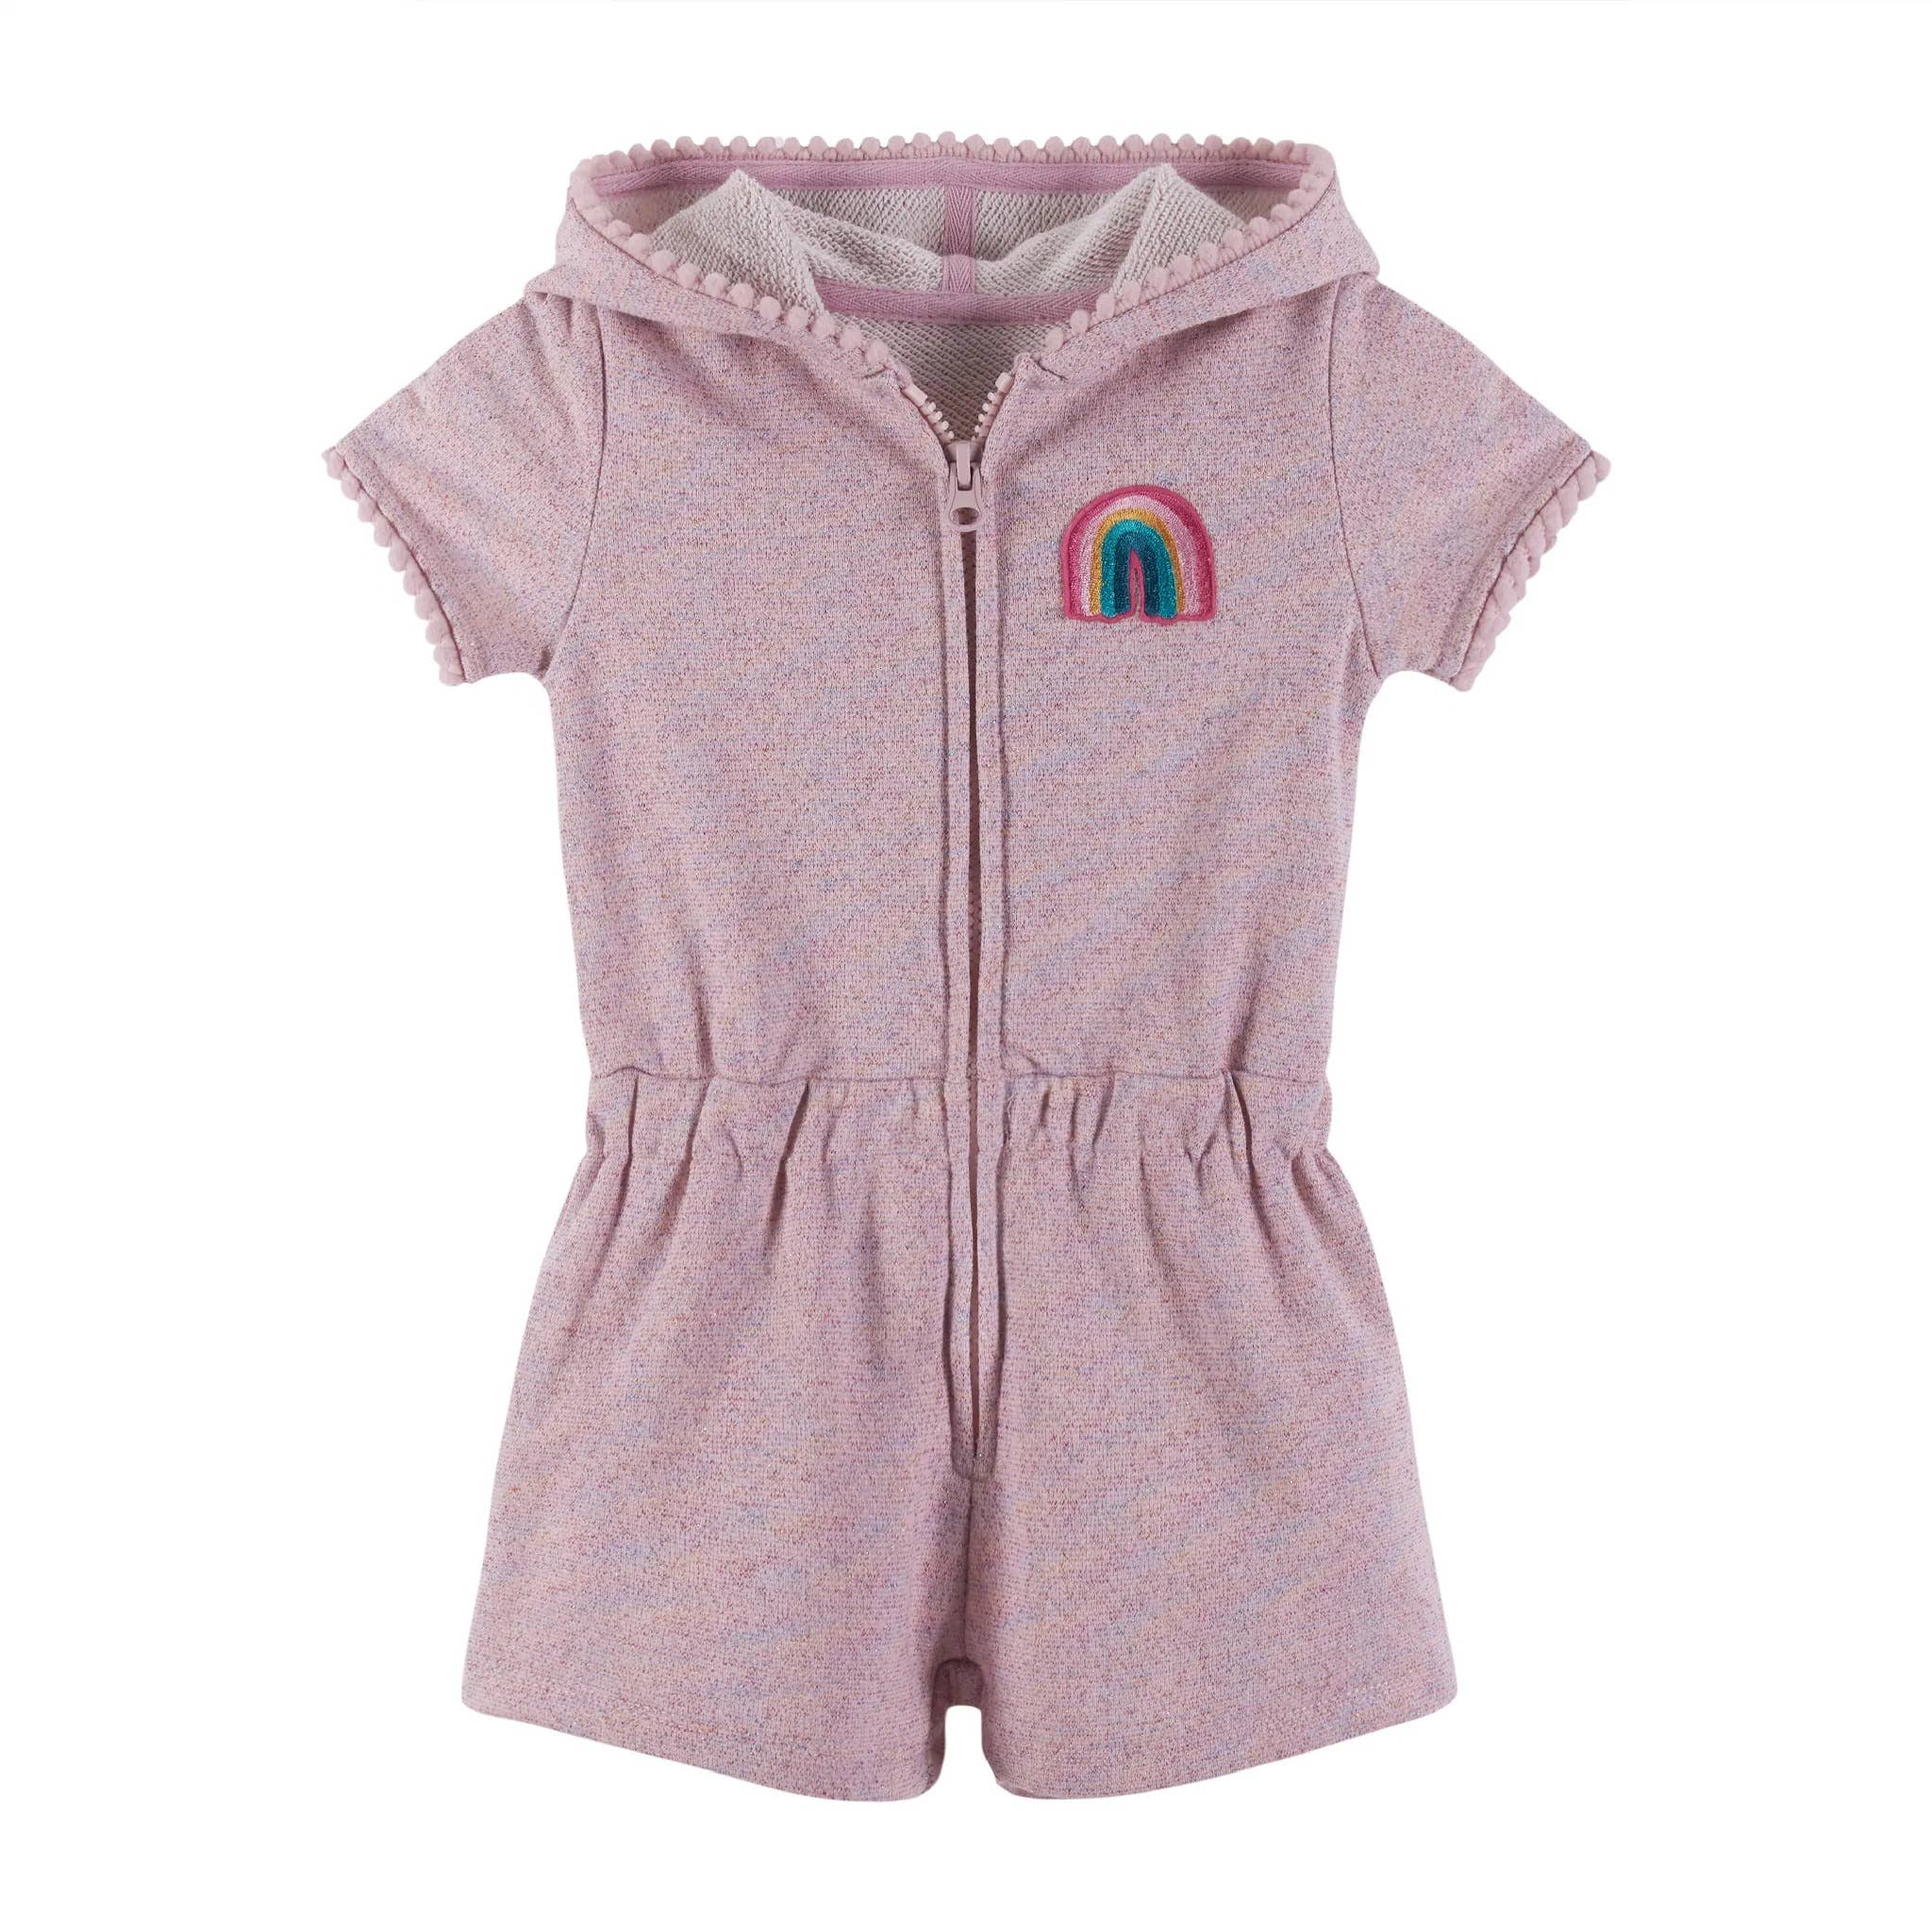 *Hooded French Terry Romper